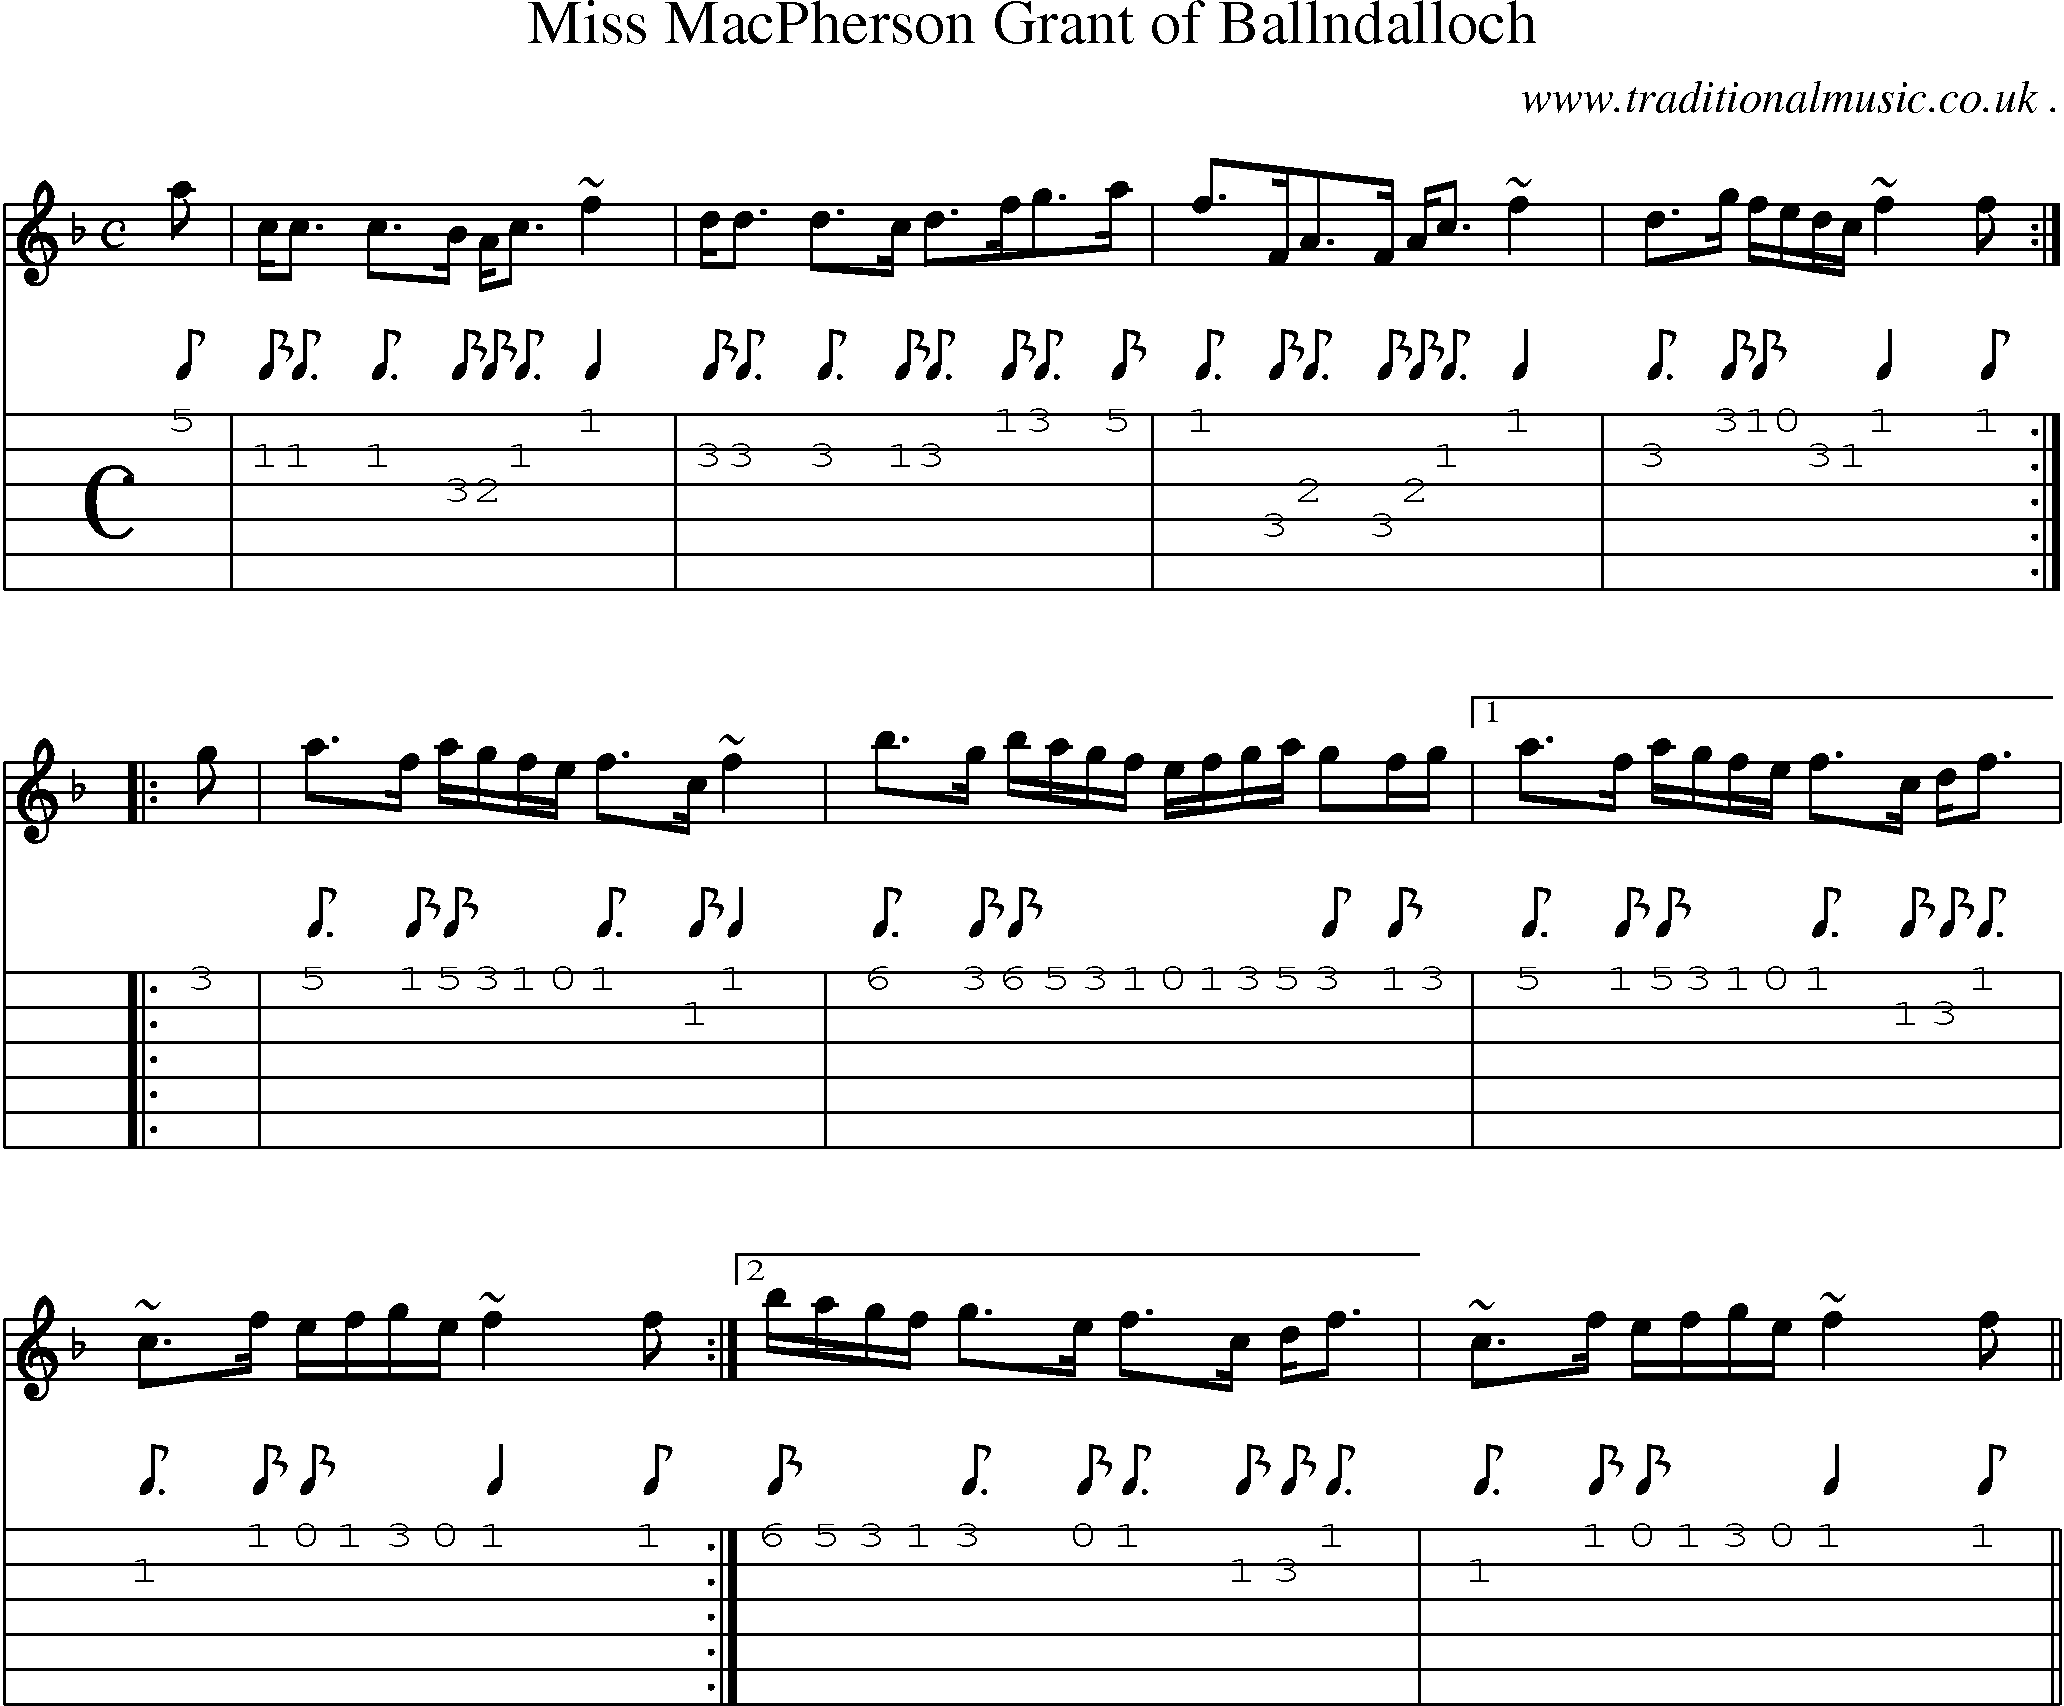 Sheet-music  score, Chords and Guitar Tabs for Miss Macpherson Grant Of Ballndalloch